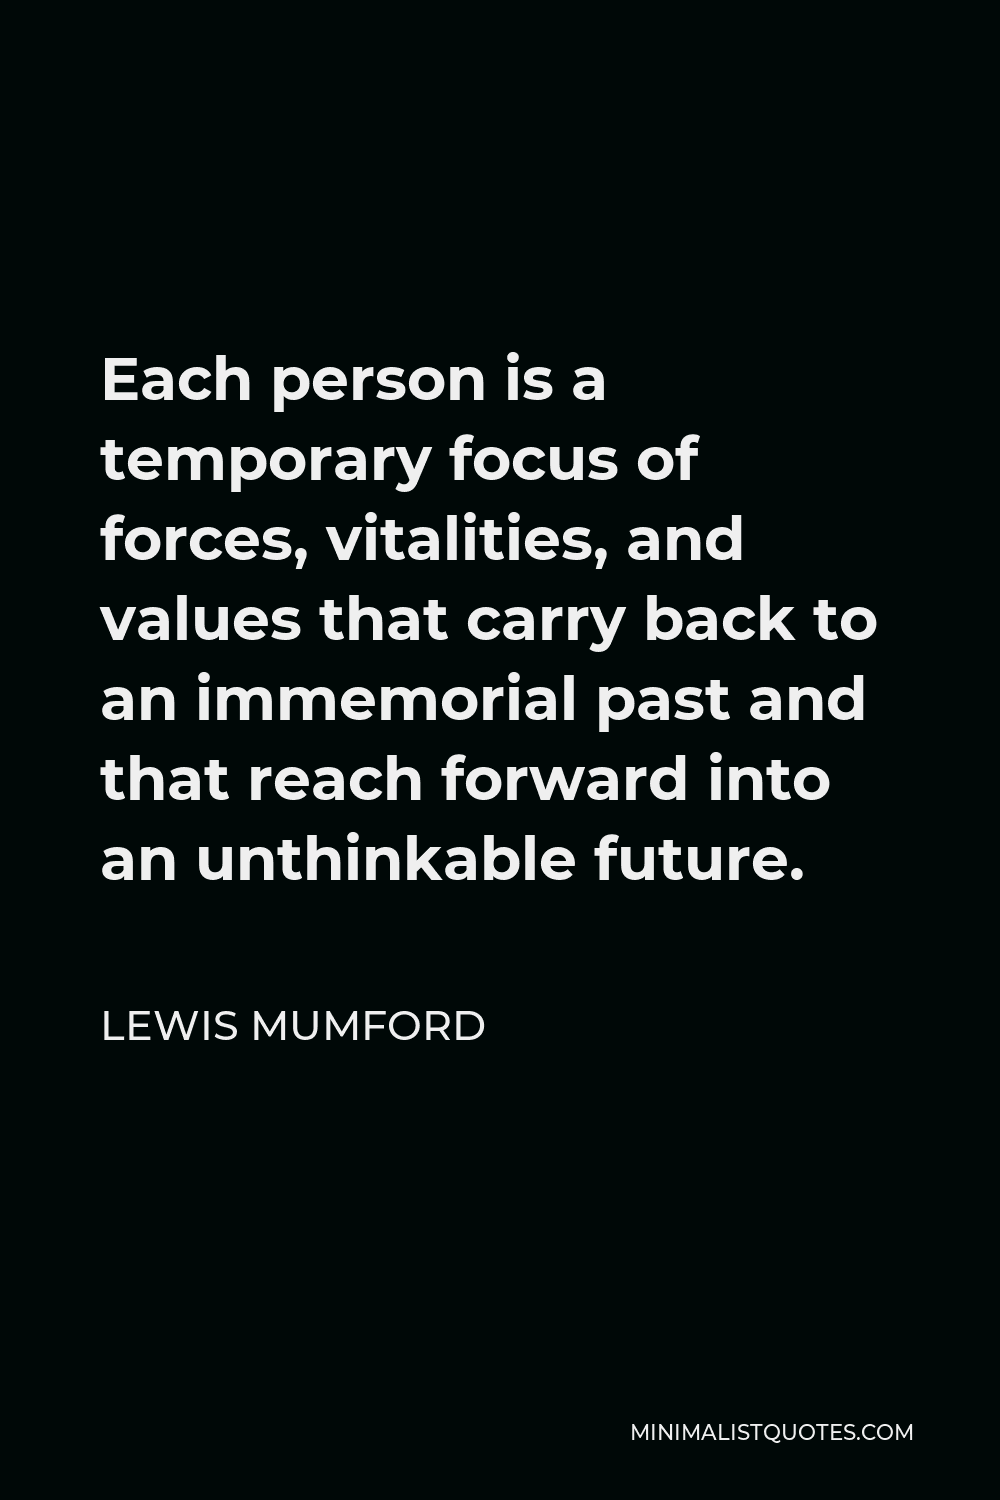 Lewis Mumford Quote - Each person is a temporary focus of forces, vitalities, and values that carry back to an immemorial past and that reach forward into an unthinkable future.